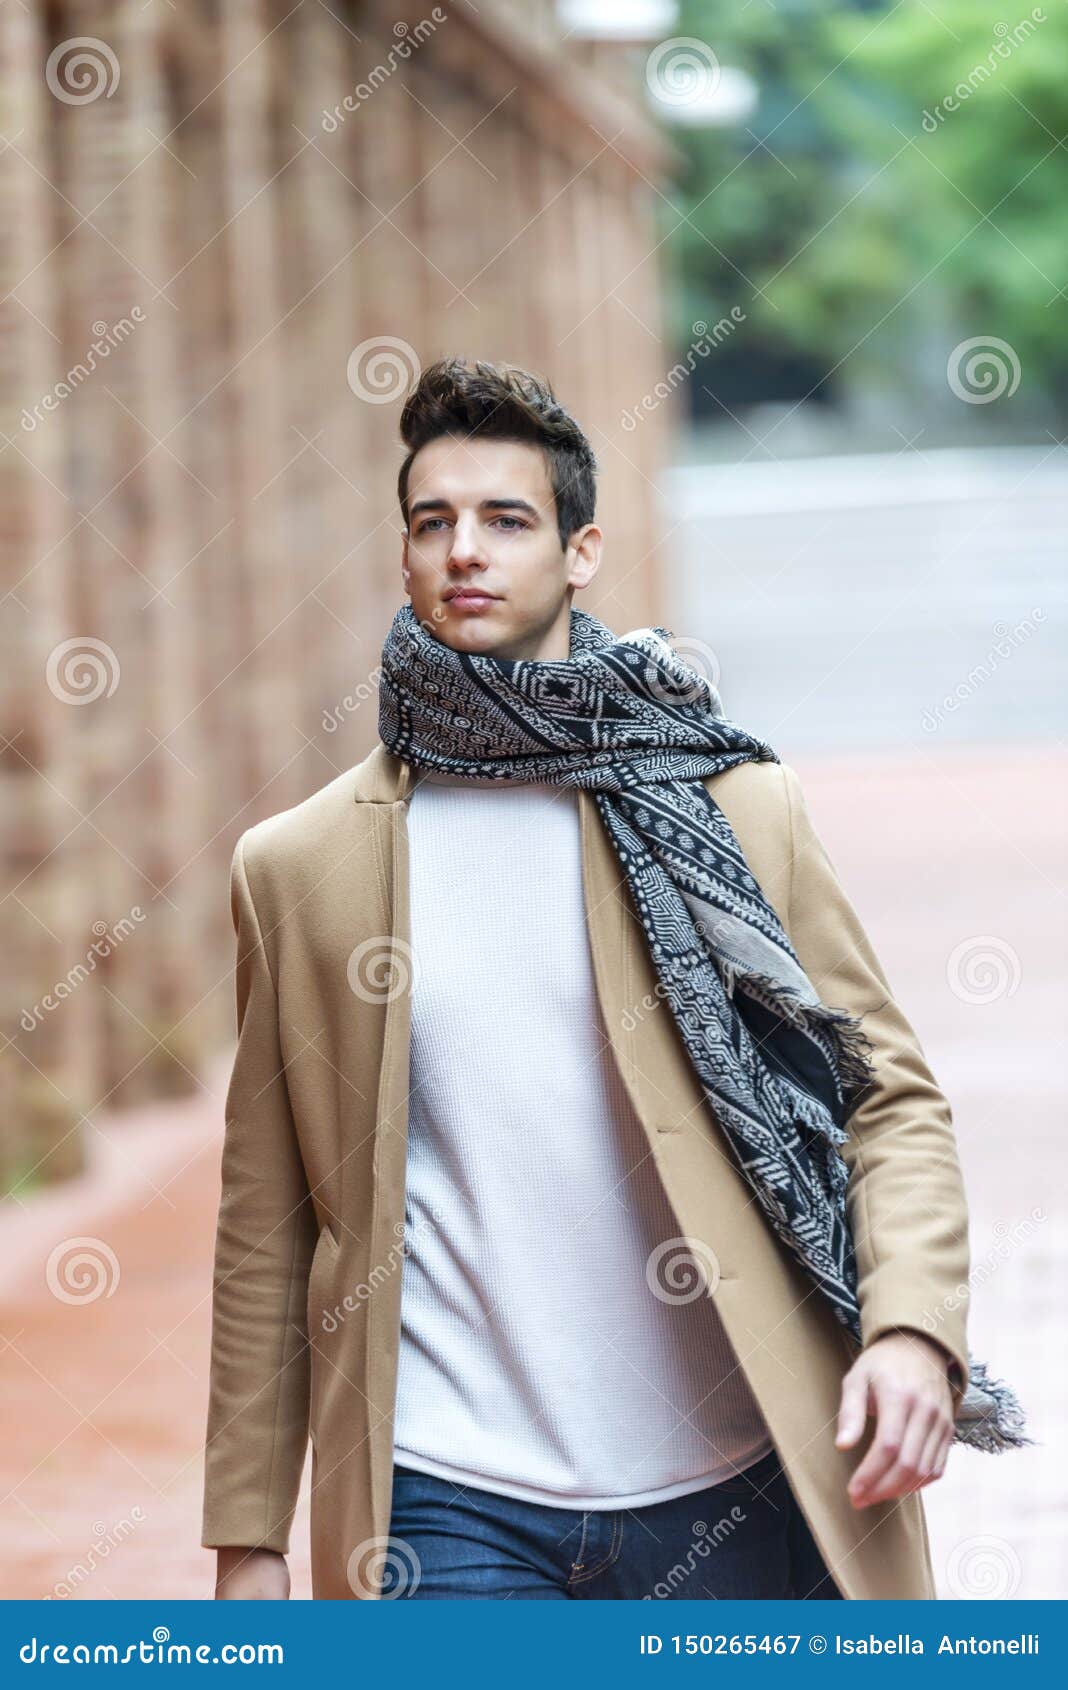 Young Man Wearing Winter Clothes in the Street. Young Guy with Modern  Hairstyle with Coat, Blue Jeans and White Sweeter Stock Image - Image of  adolescent, background: 150265467